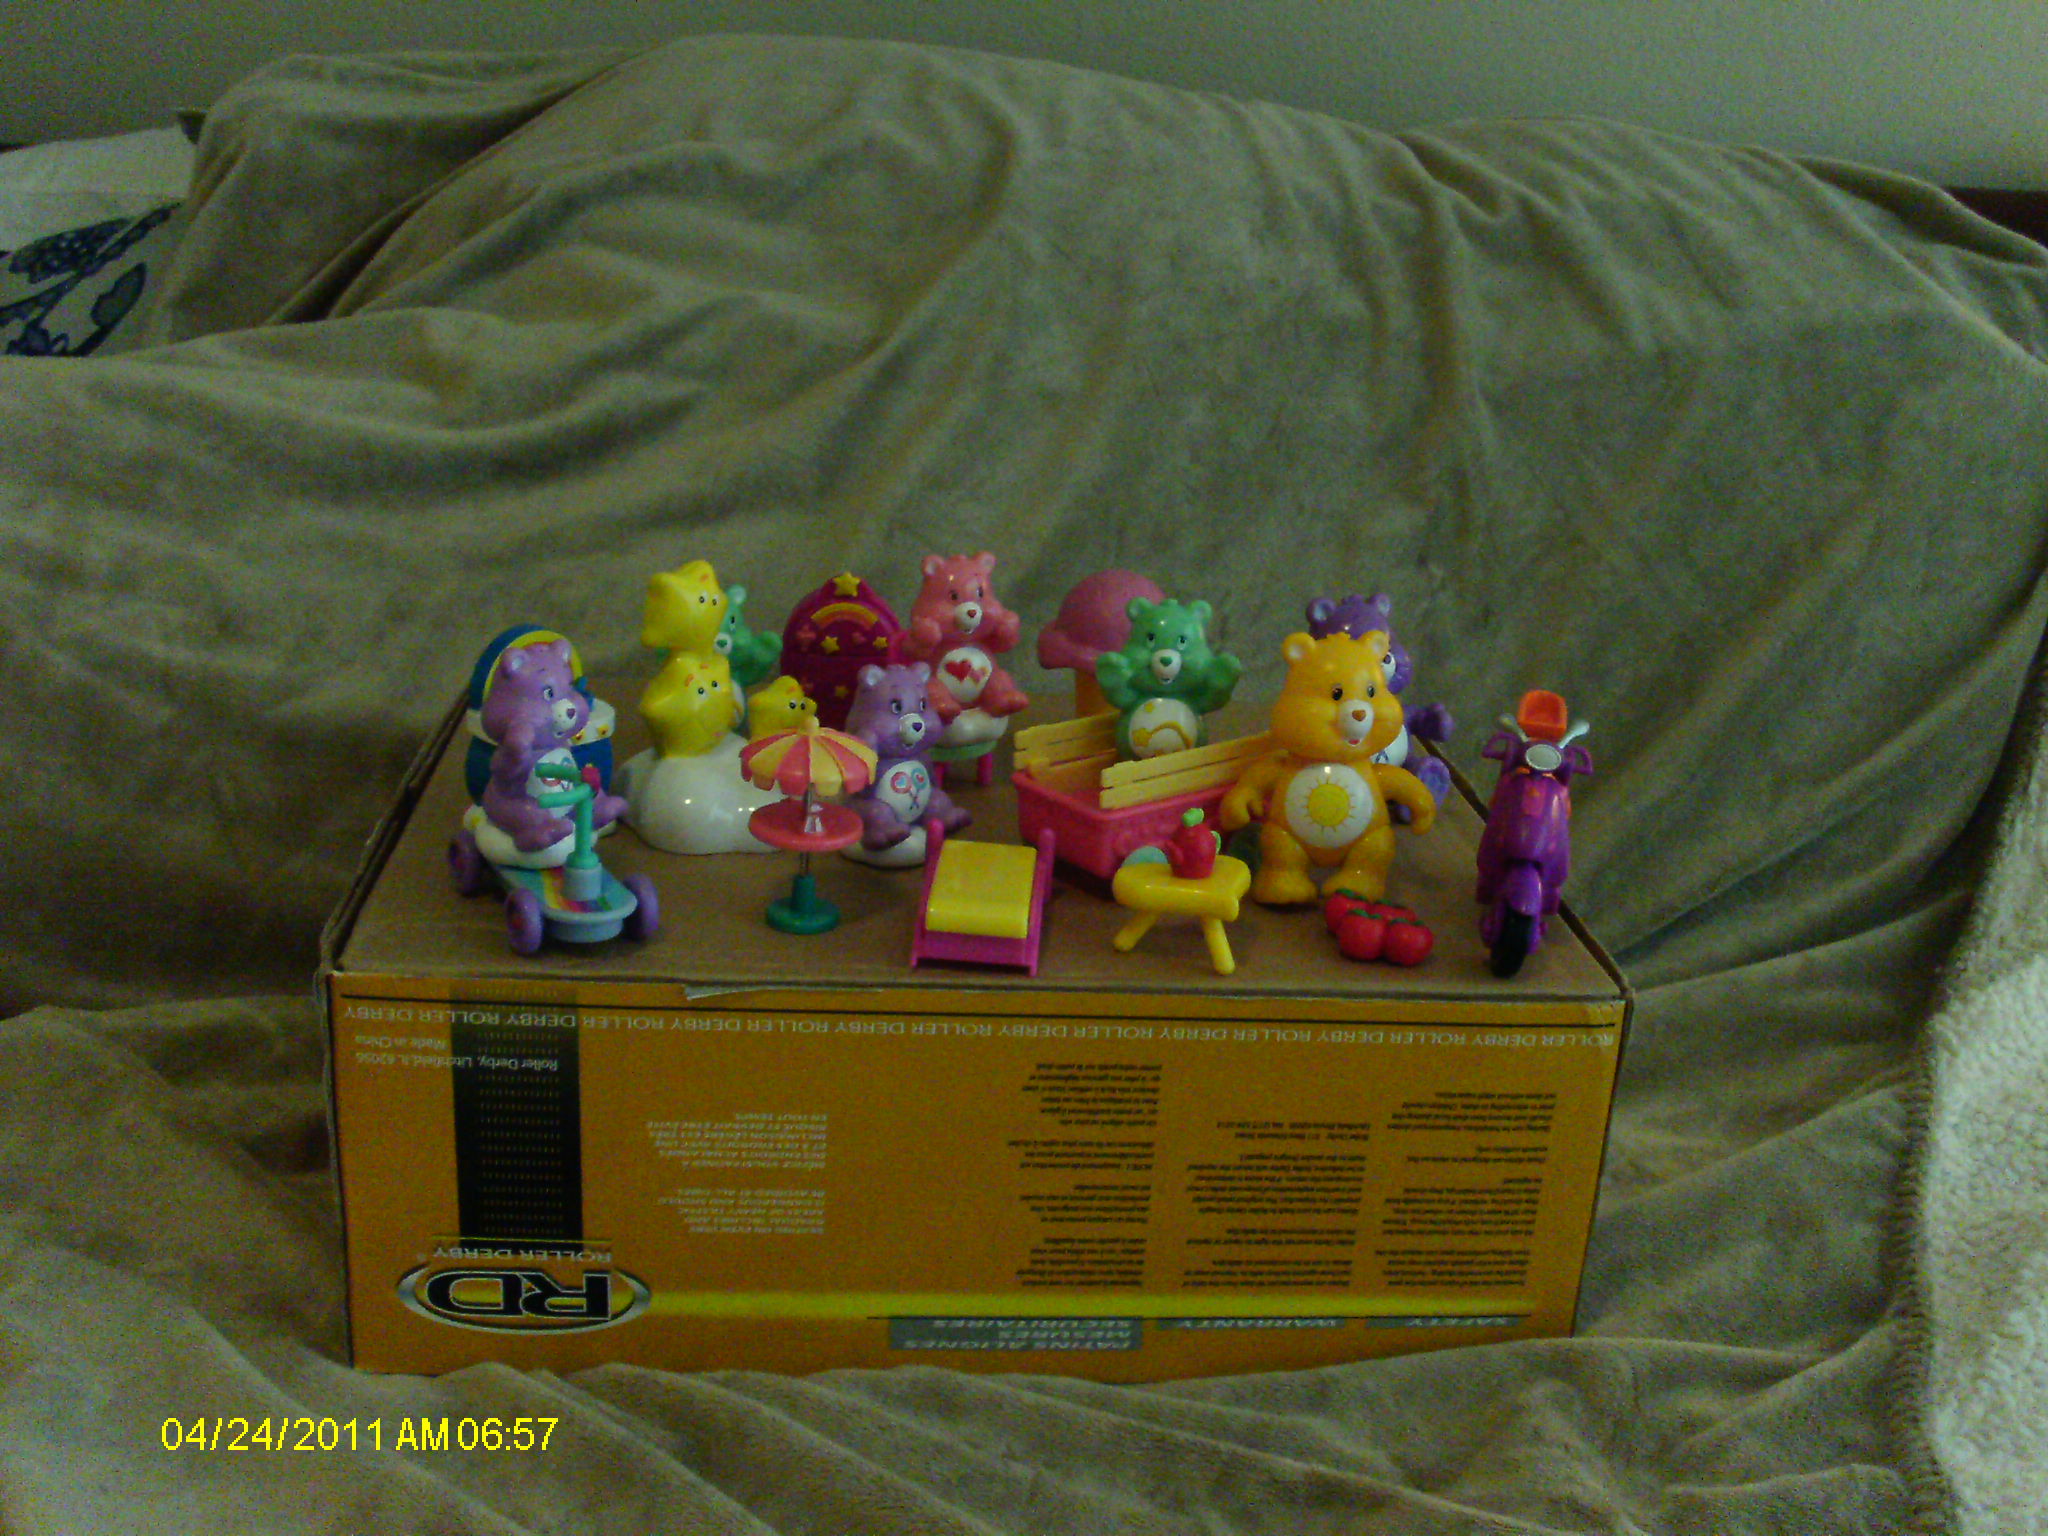 Care Bear Plastic Figurines and accessories